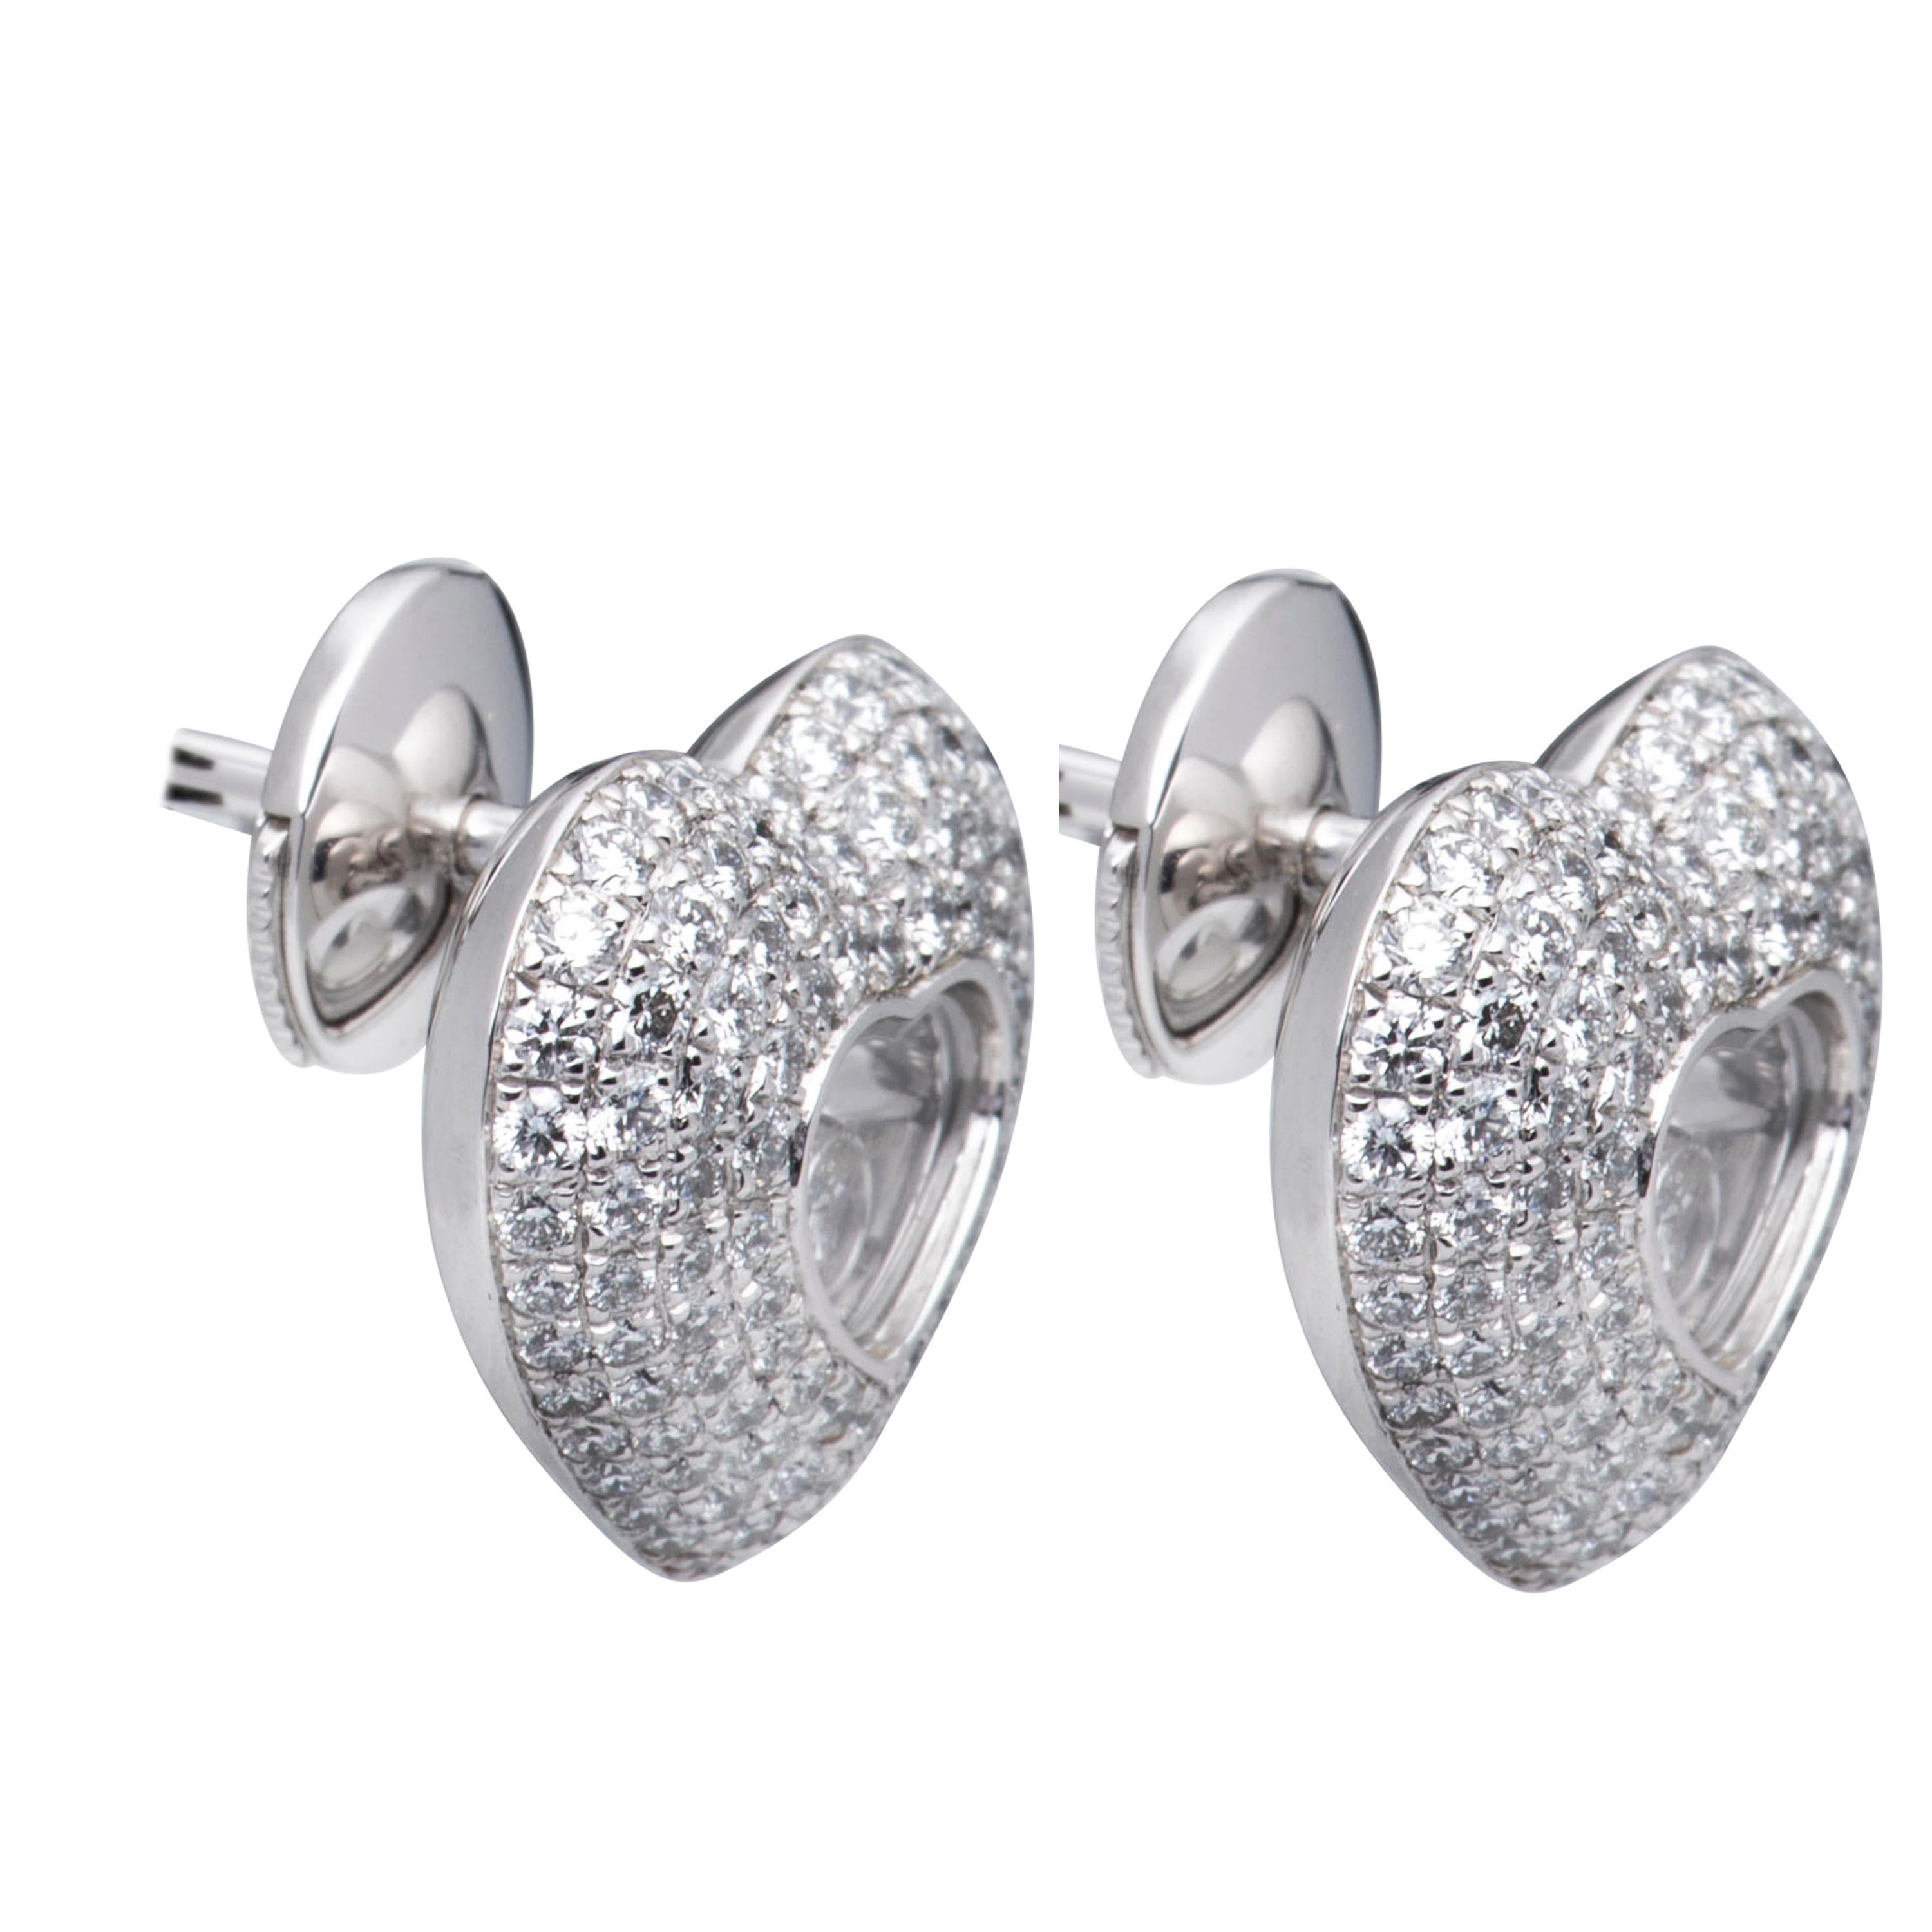 Chopard Happy Diamonds Heart Earrings

Model Number: 83/7417-1001

100% Authentic

Brand New

Comes with original Chopard box, certificate of authenticity and warranty, and jewels manual

18 Karat White Gold (6.70gr)

214 Diamonds total on the